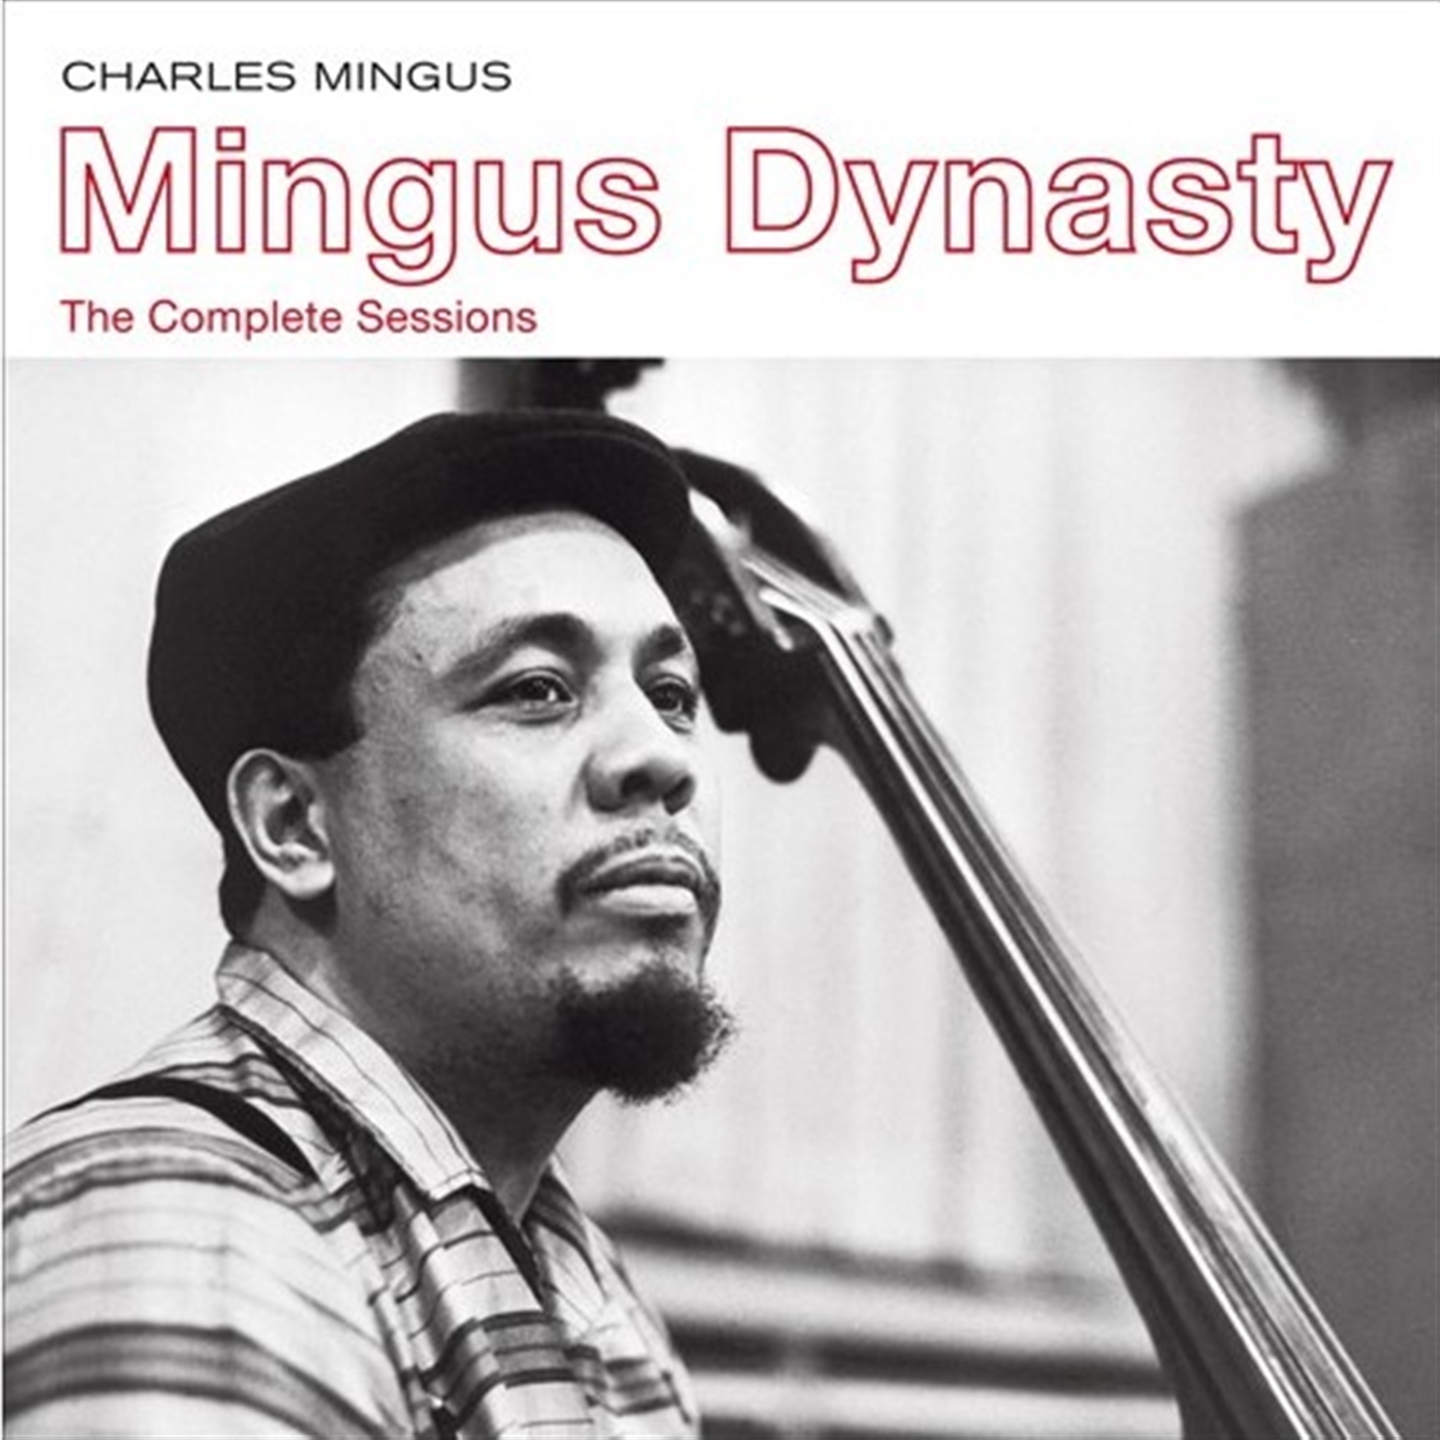 MINGUS DYNASTY - THE COMPLETE SESSIONS (ON A SINGLE SET FOR THE FIRST TIME EVER